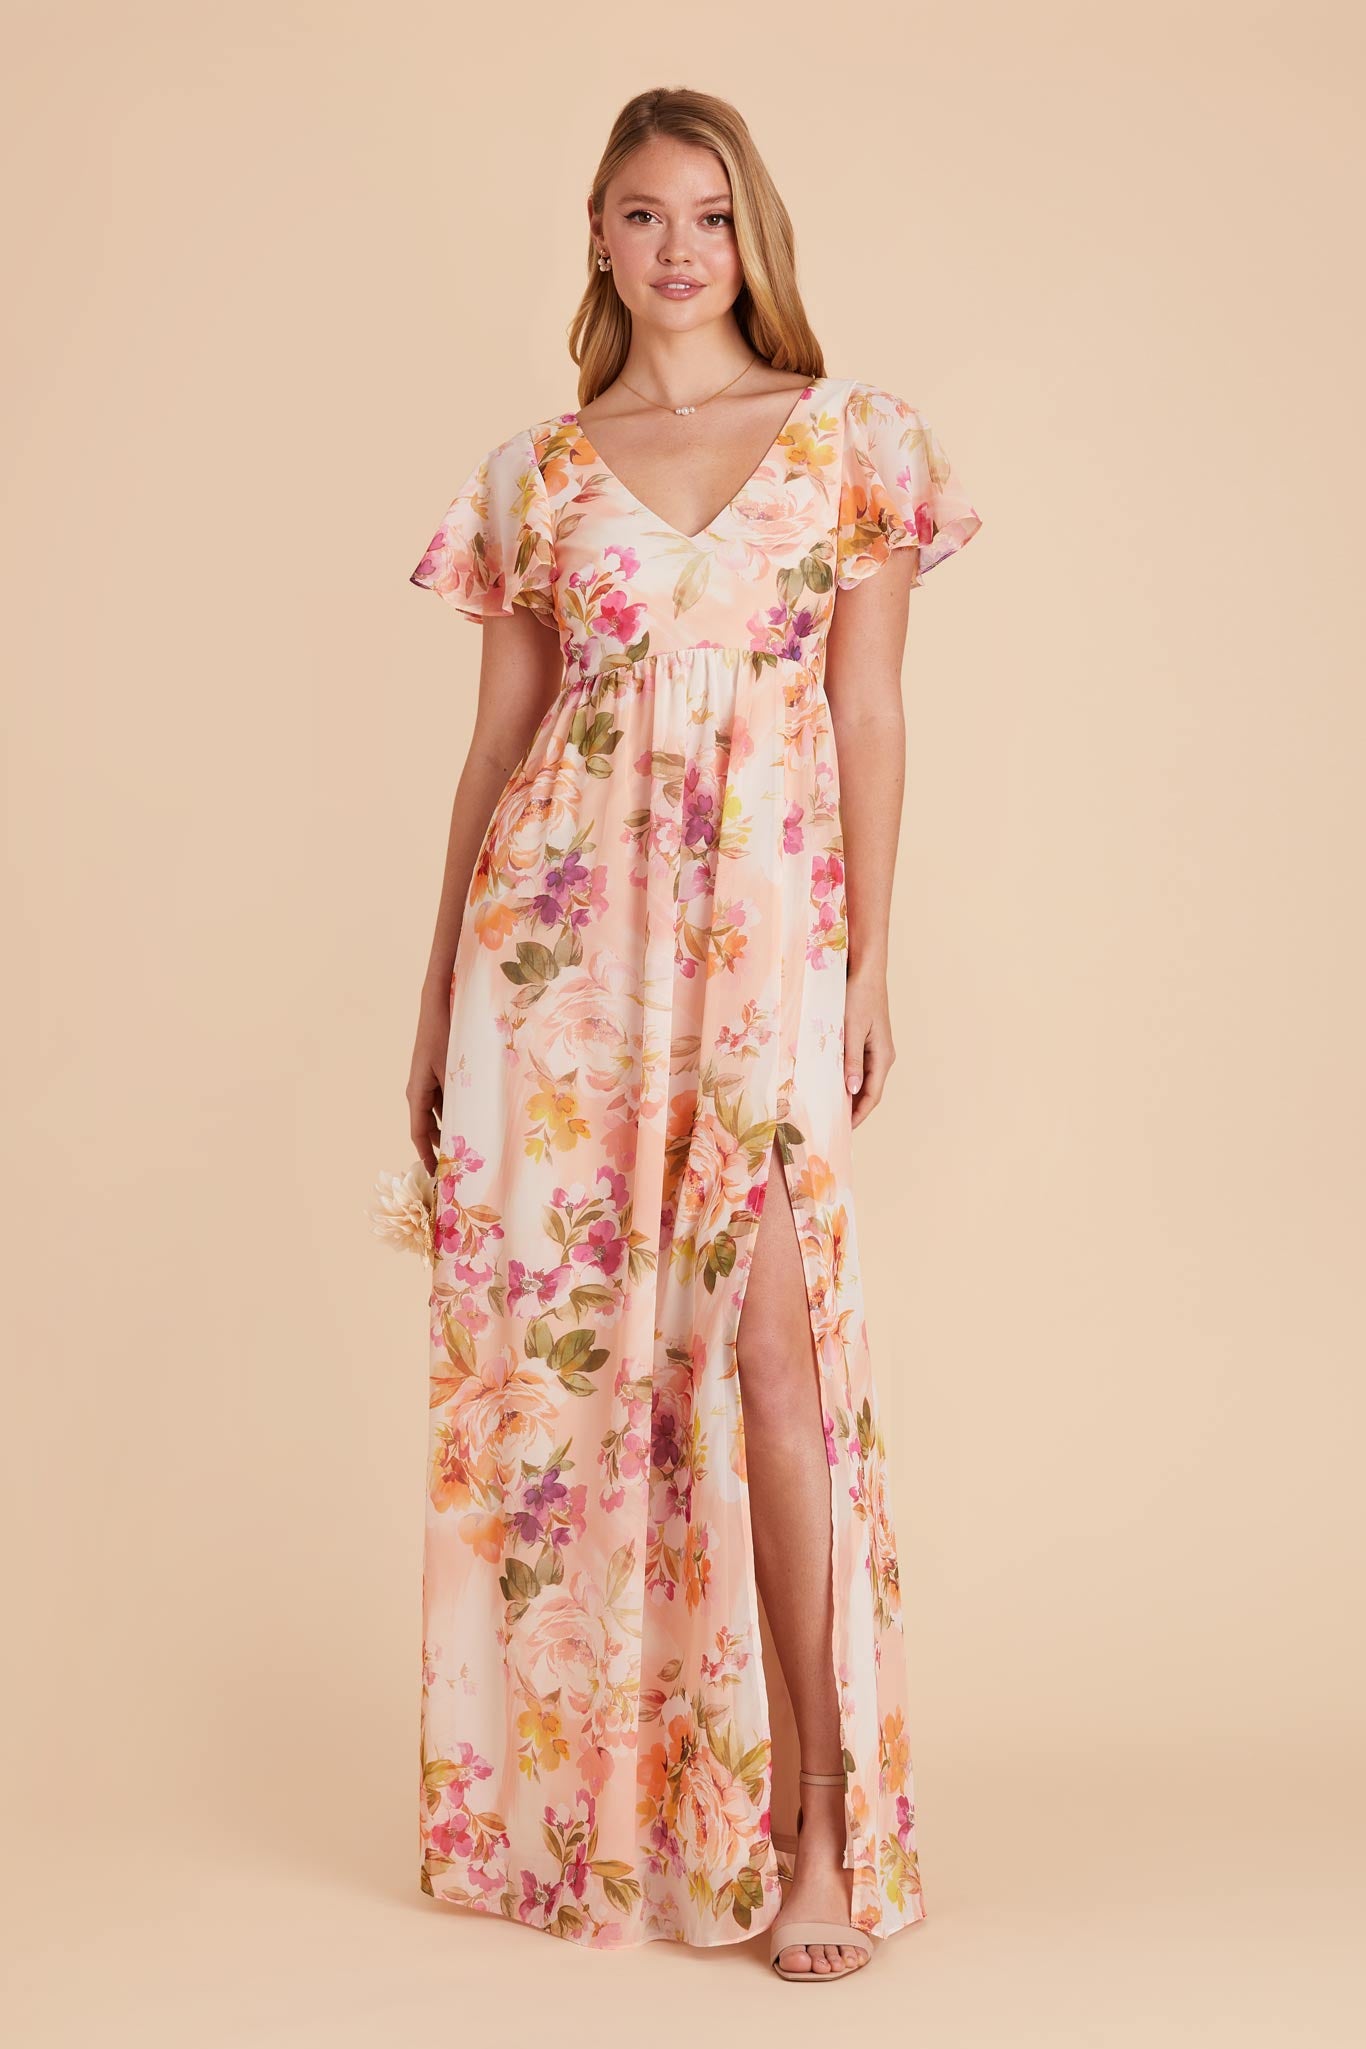 Coral Sunset Peonies Hannah Empire Dress by Birdy Grey